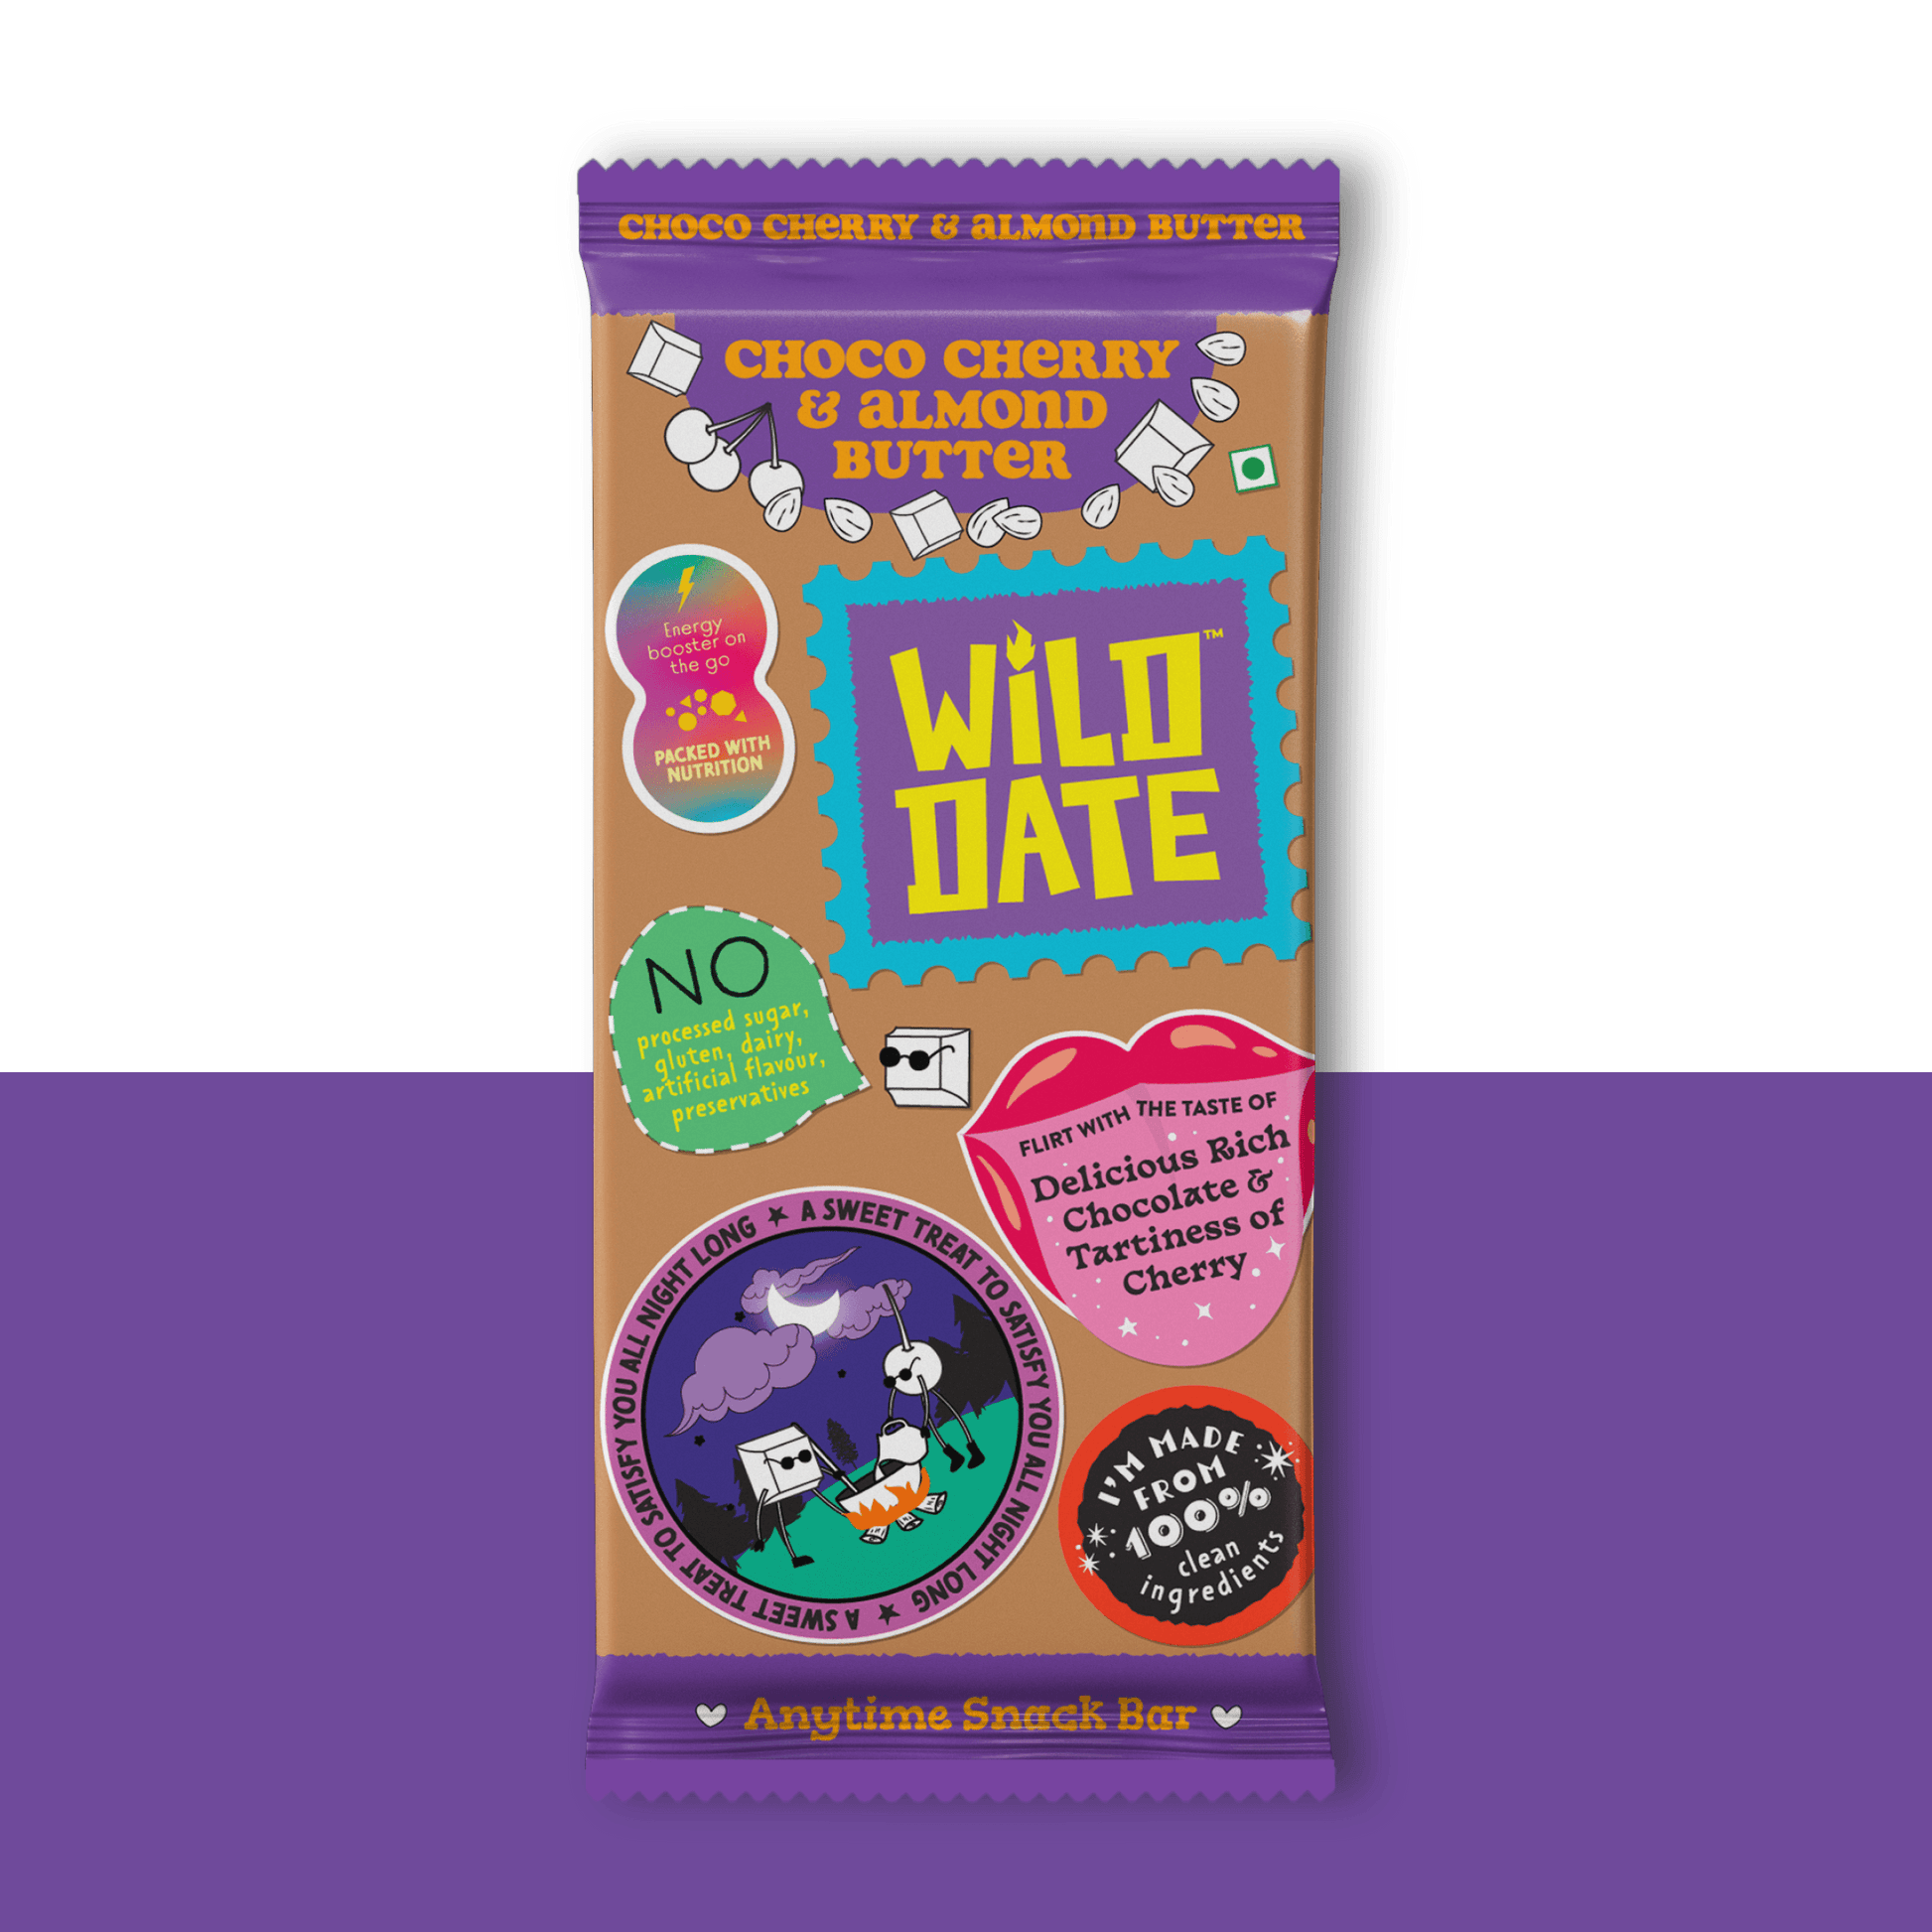 Wild Date Choco Cherry and ALmond Butter Snack Bar